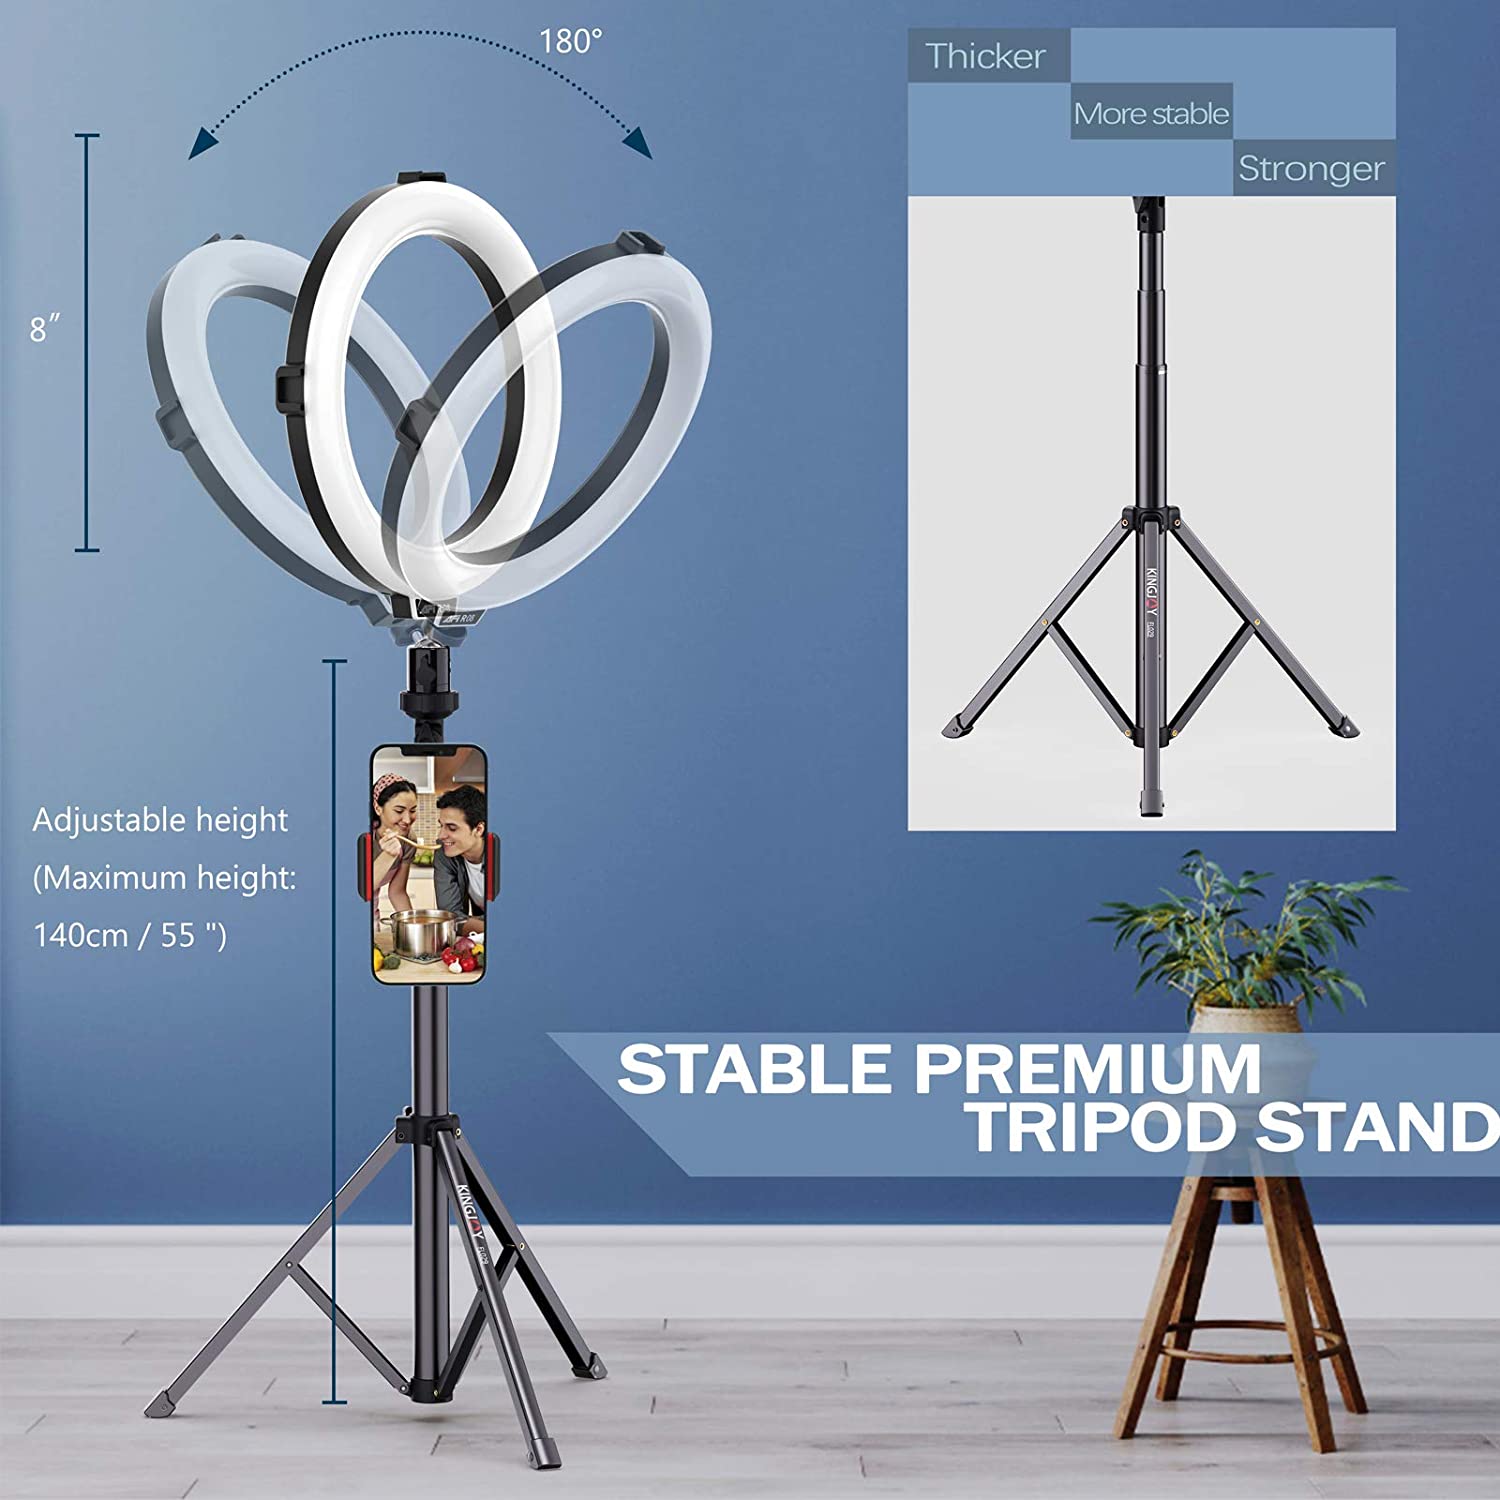 10 Selfie Ring Light With Tripod Stand Phone Holder For Live Stream Makeup  YouTube Video Photography Mini Led Camera Ringlight From Promic, $26.14 |  DHgate.Com